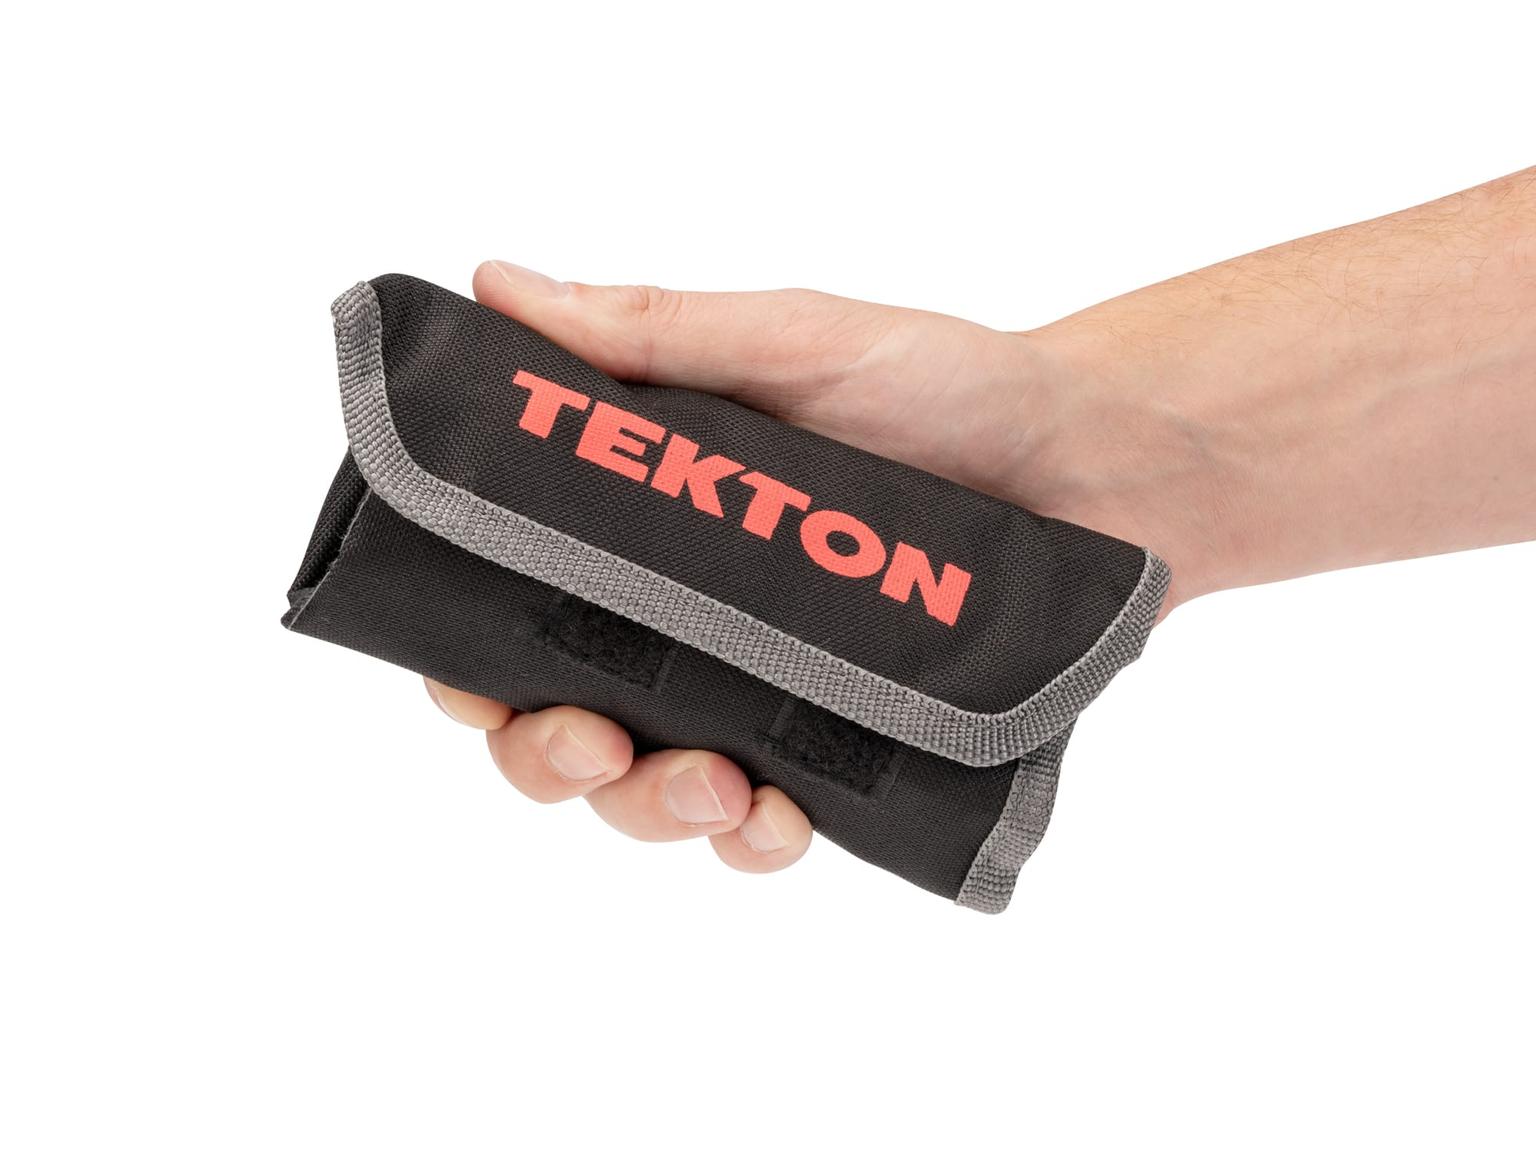 TEKTON ORG27108-T 8-Tool Stubby Combination Wrench Pouch (5/16-3/4 in.)